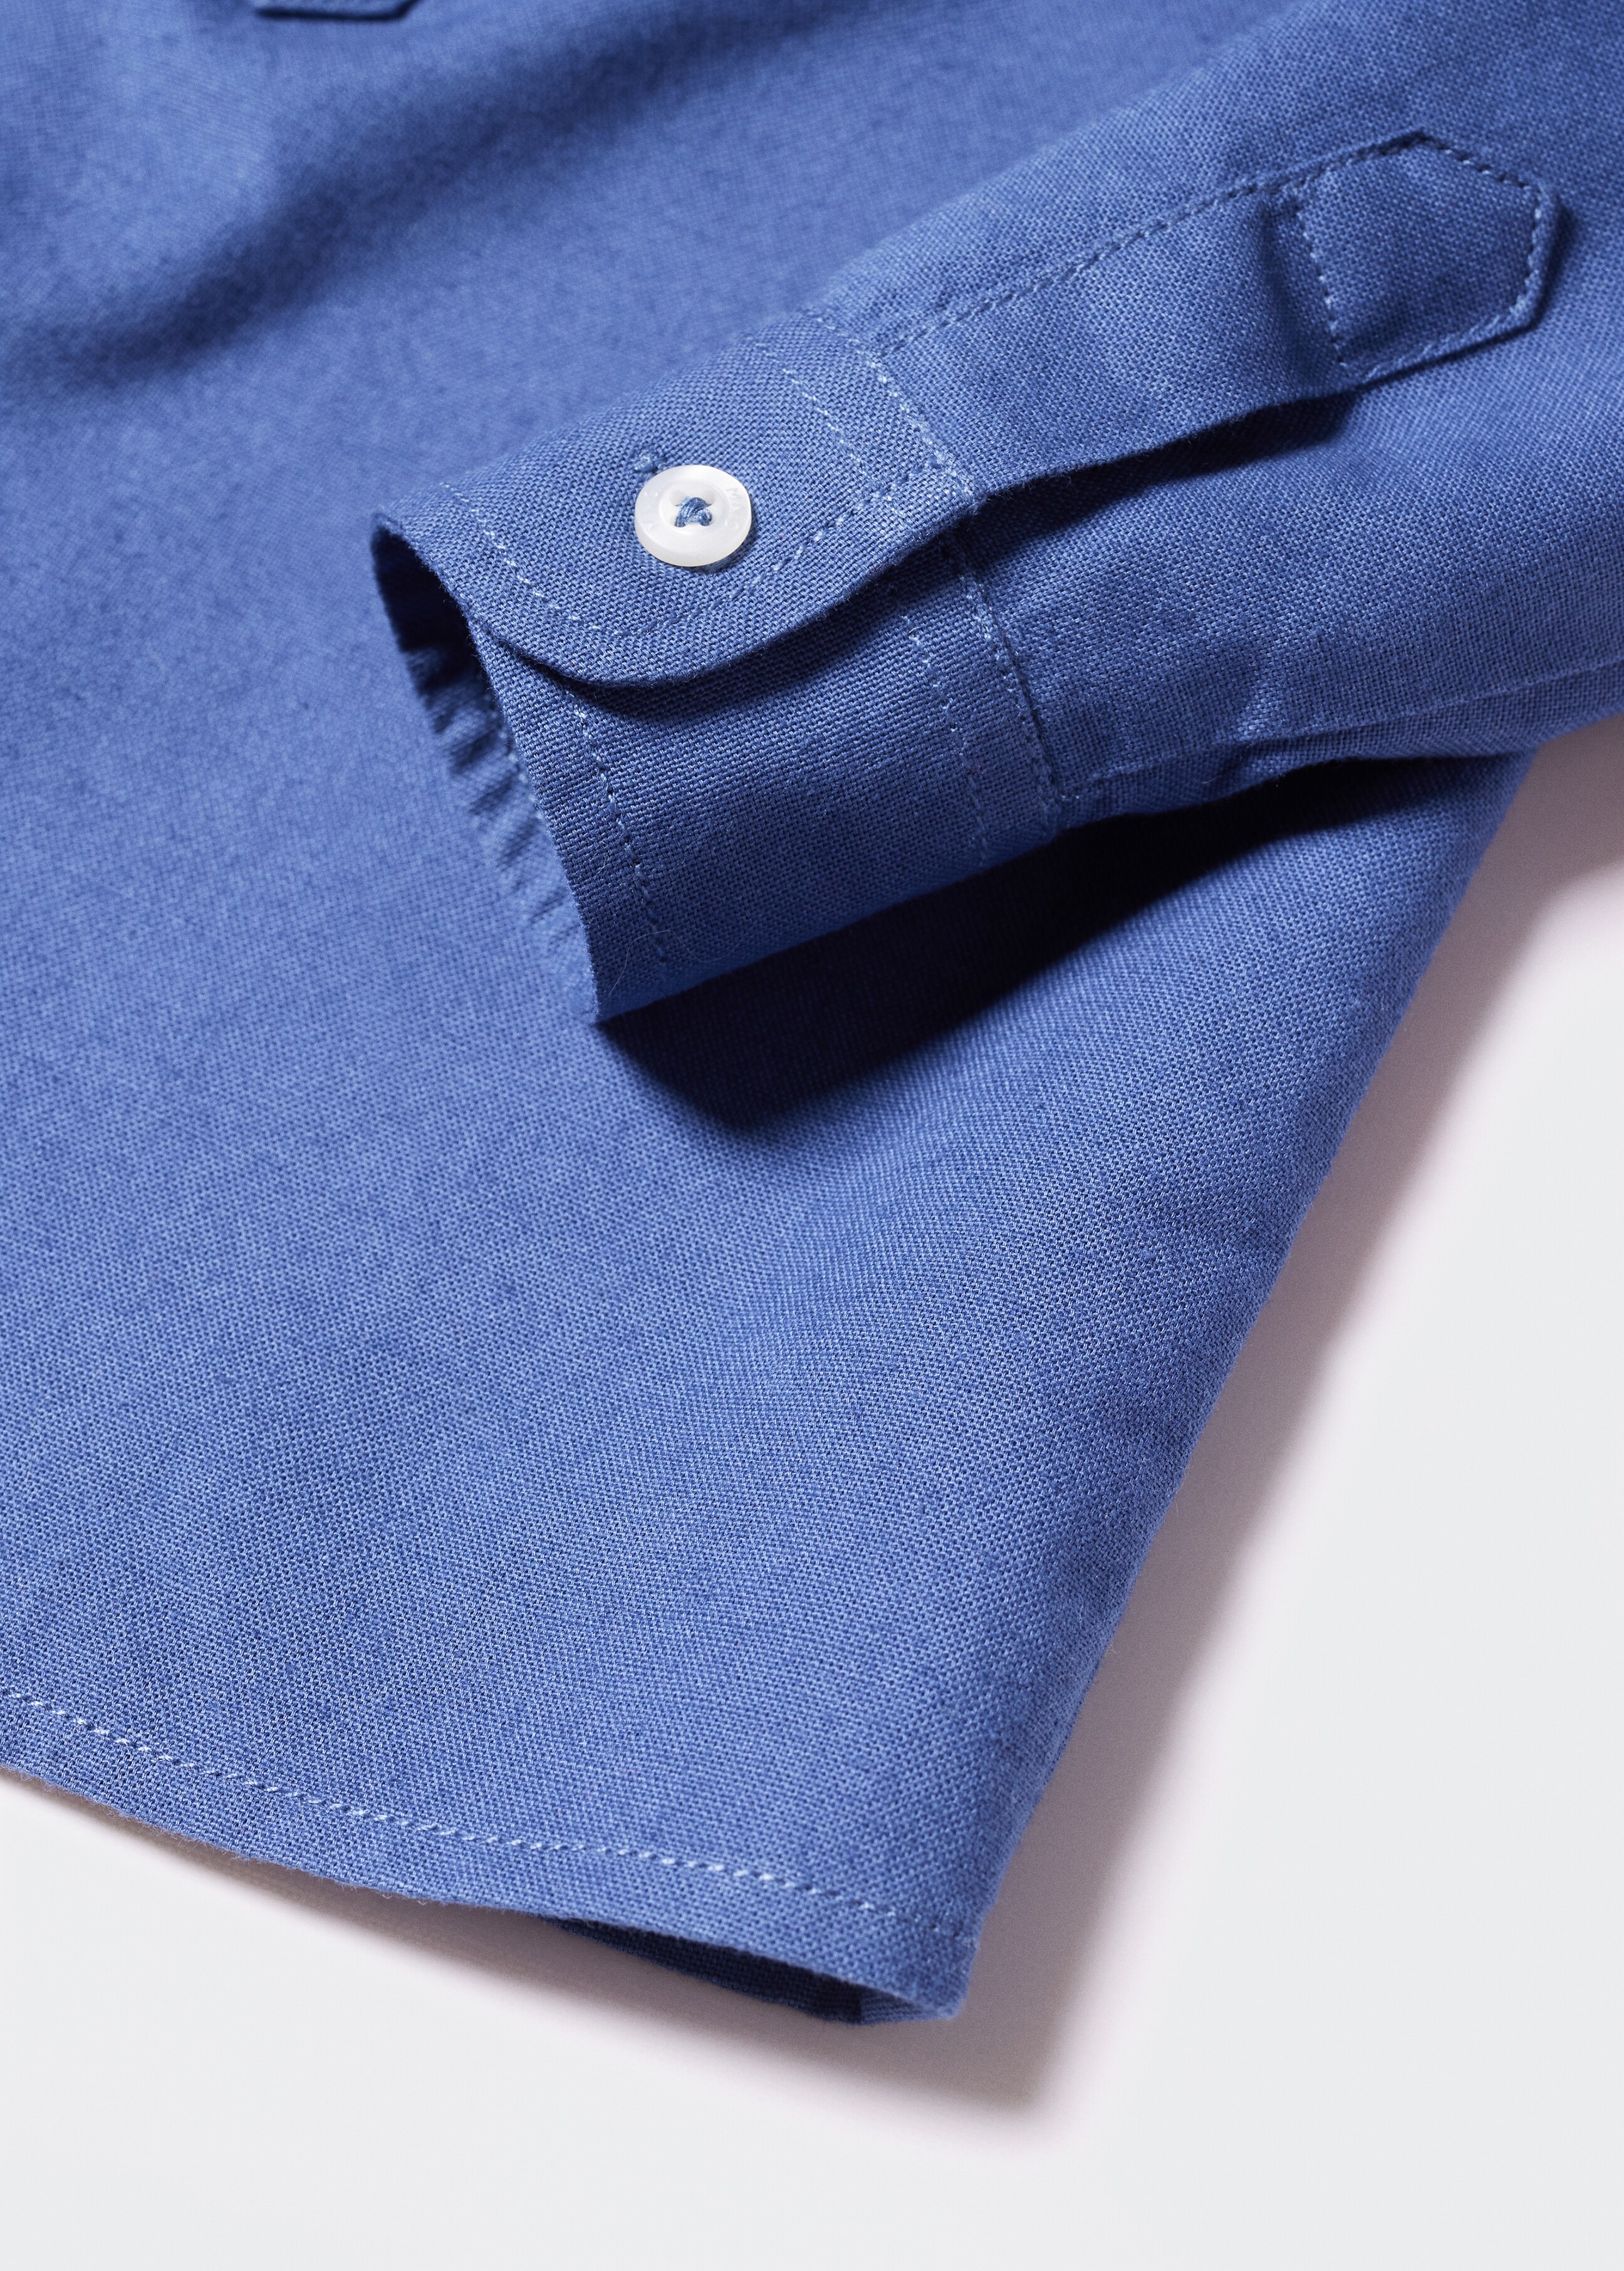 Cotton shirt - Details of the article 0